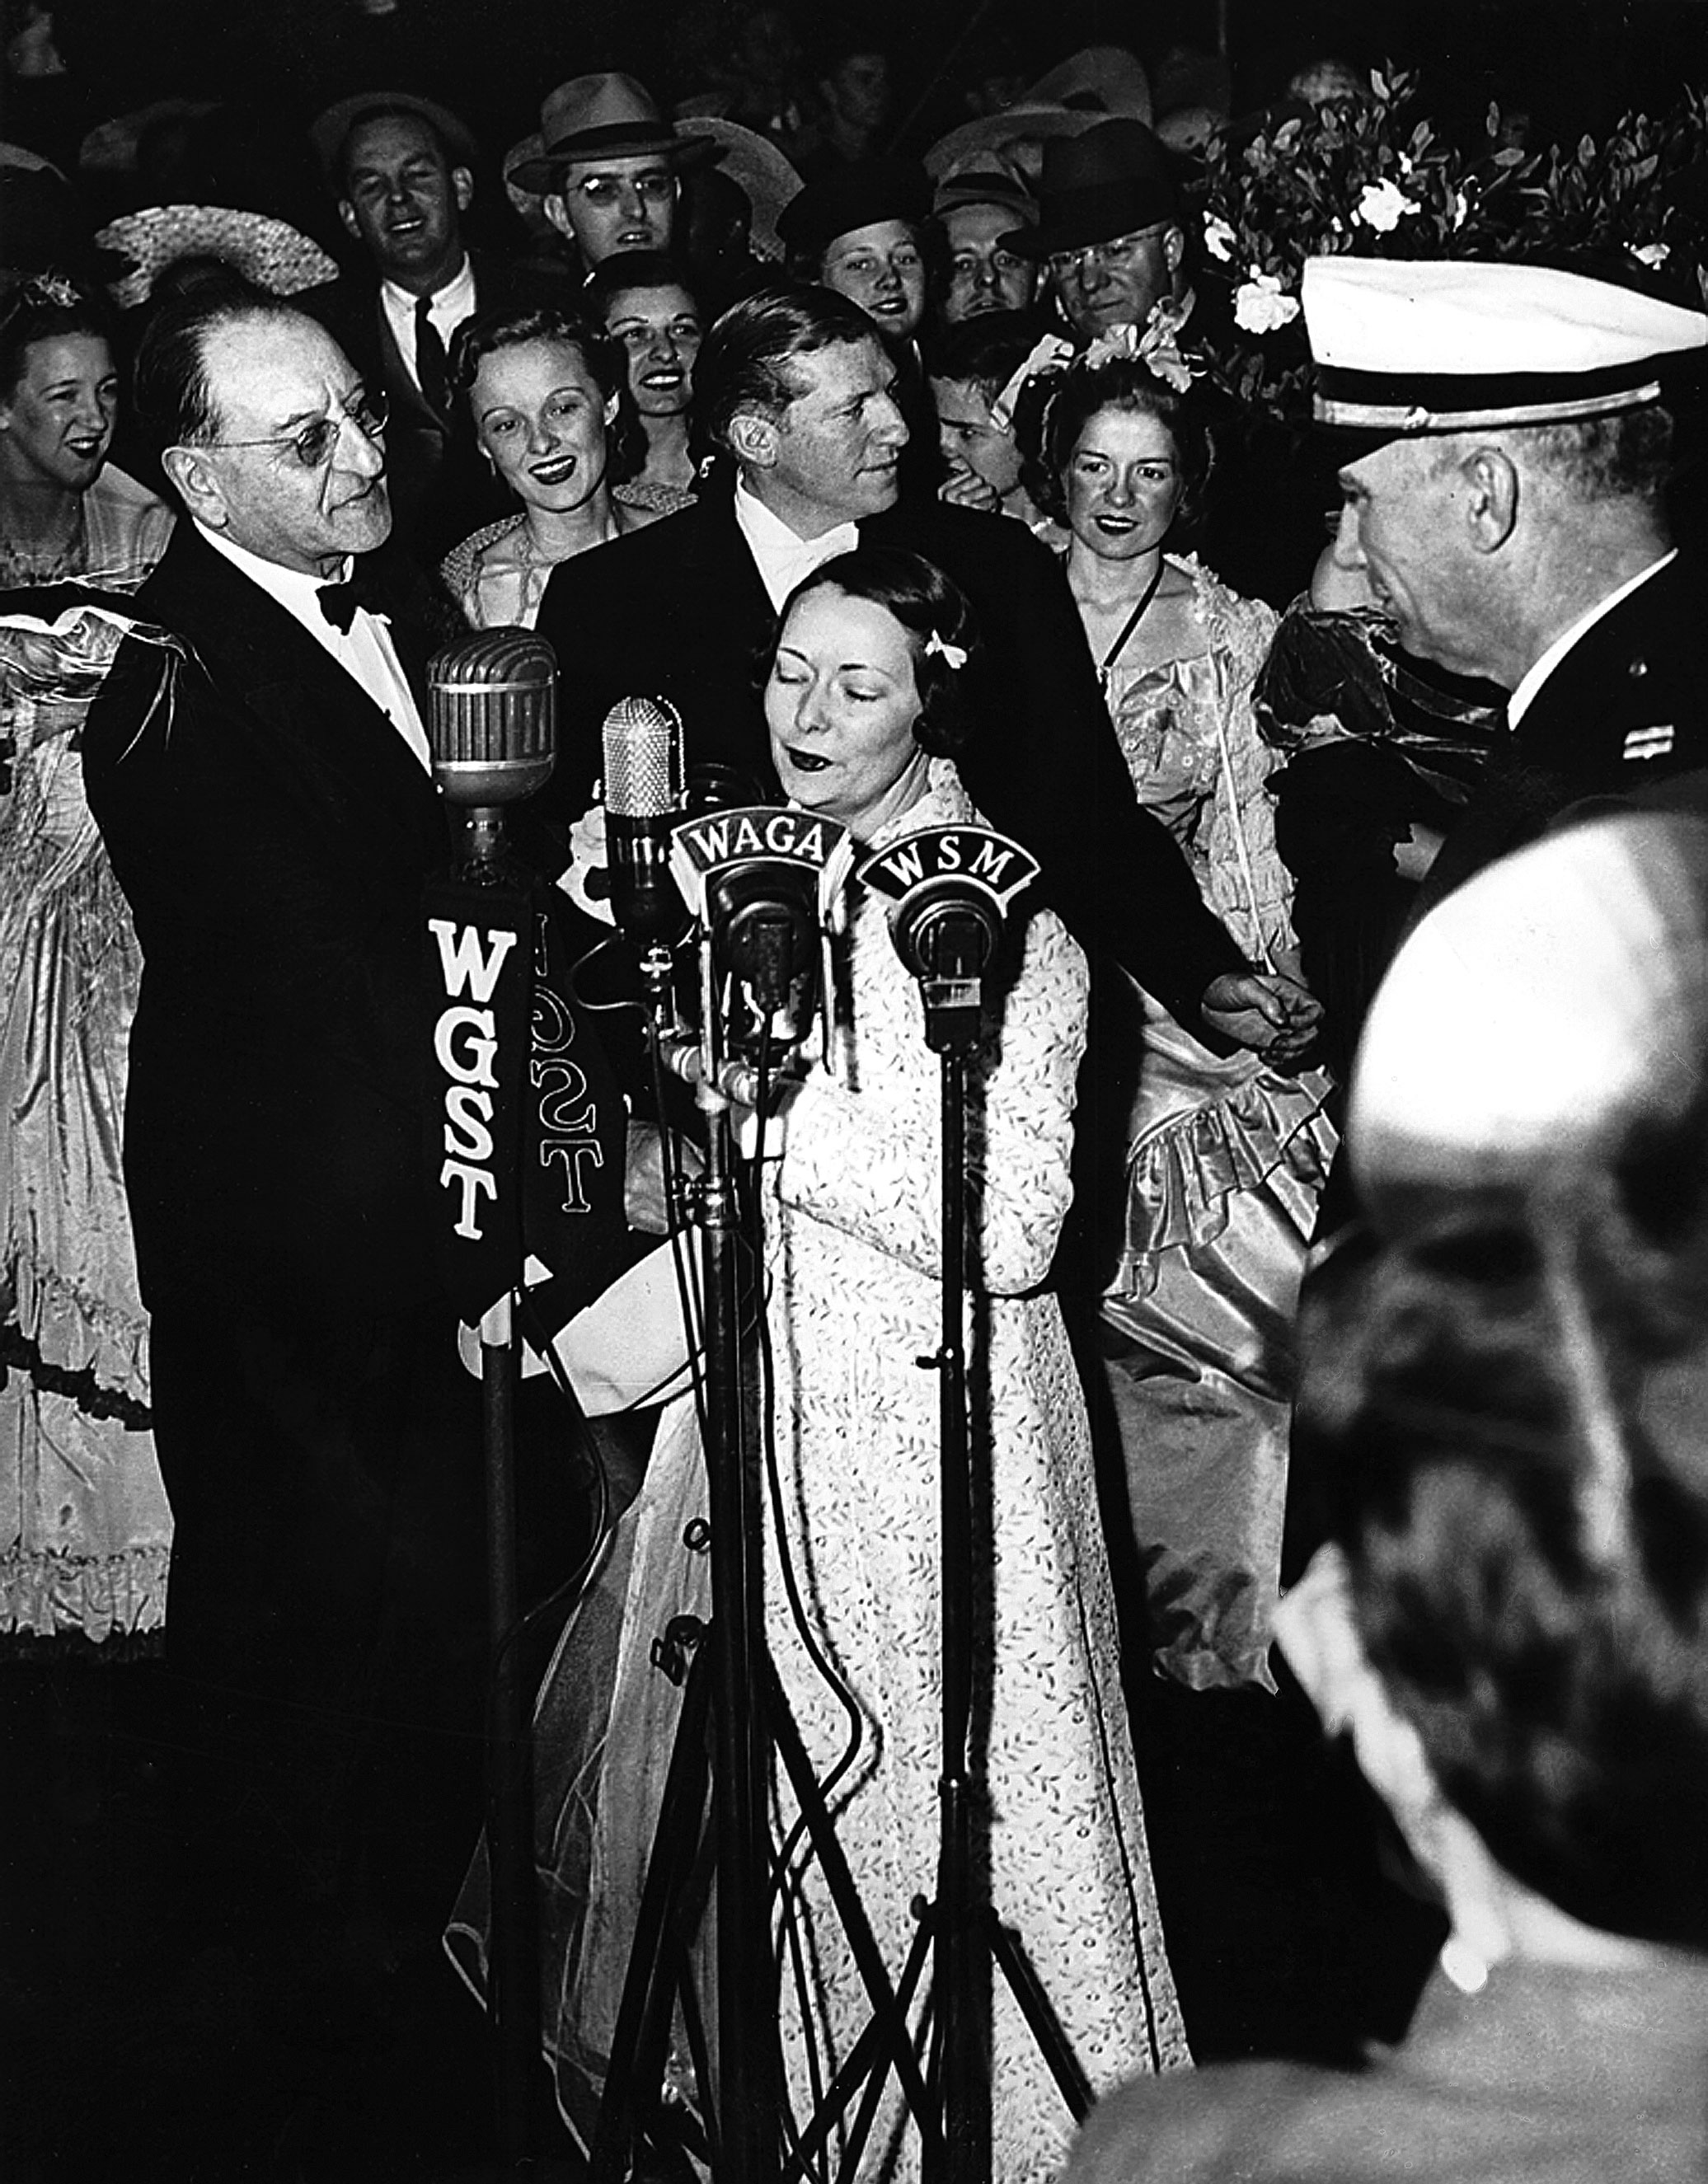 Margaret Mitchell attended the Atlanta gala, despite having stated she wanted nothing to do with the movie.